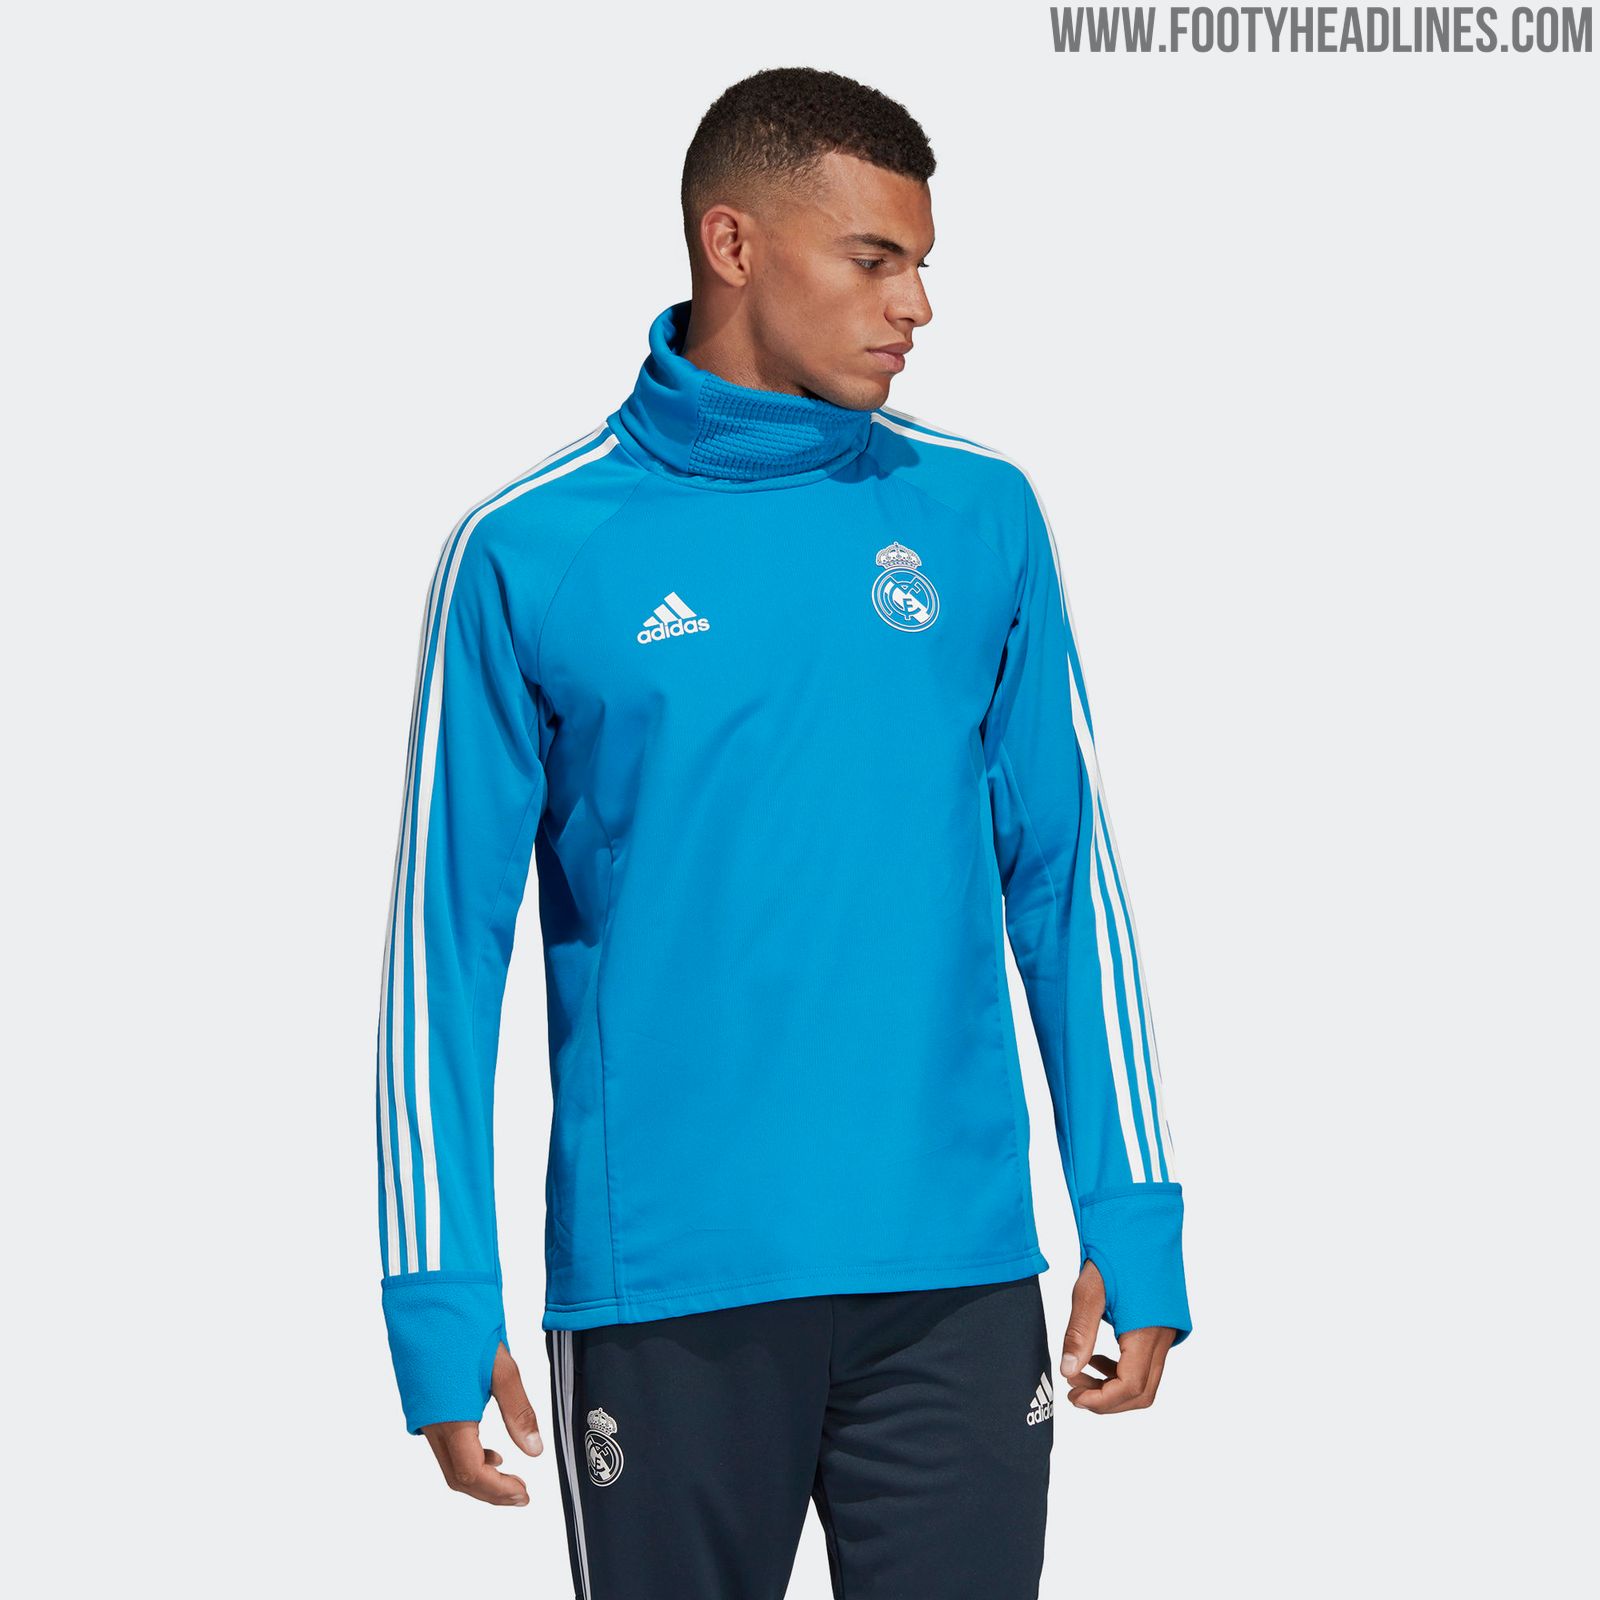 Real Madrid 2019 Training Collection Leaked - Footy Headlines